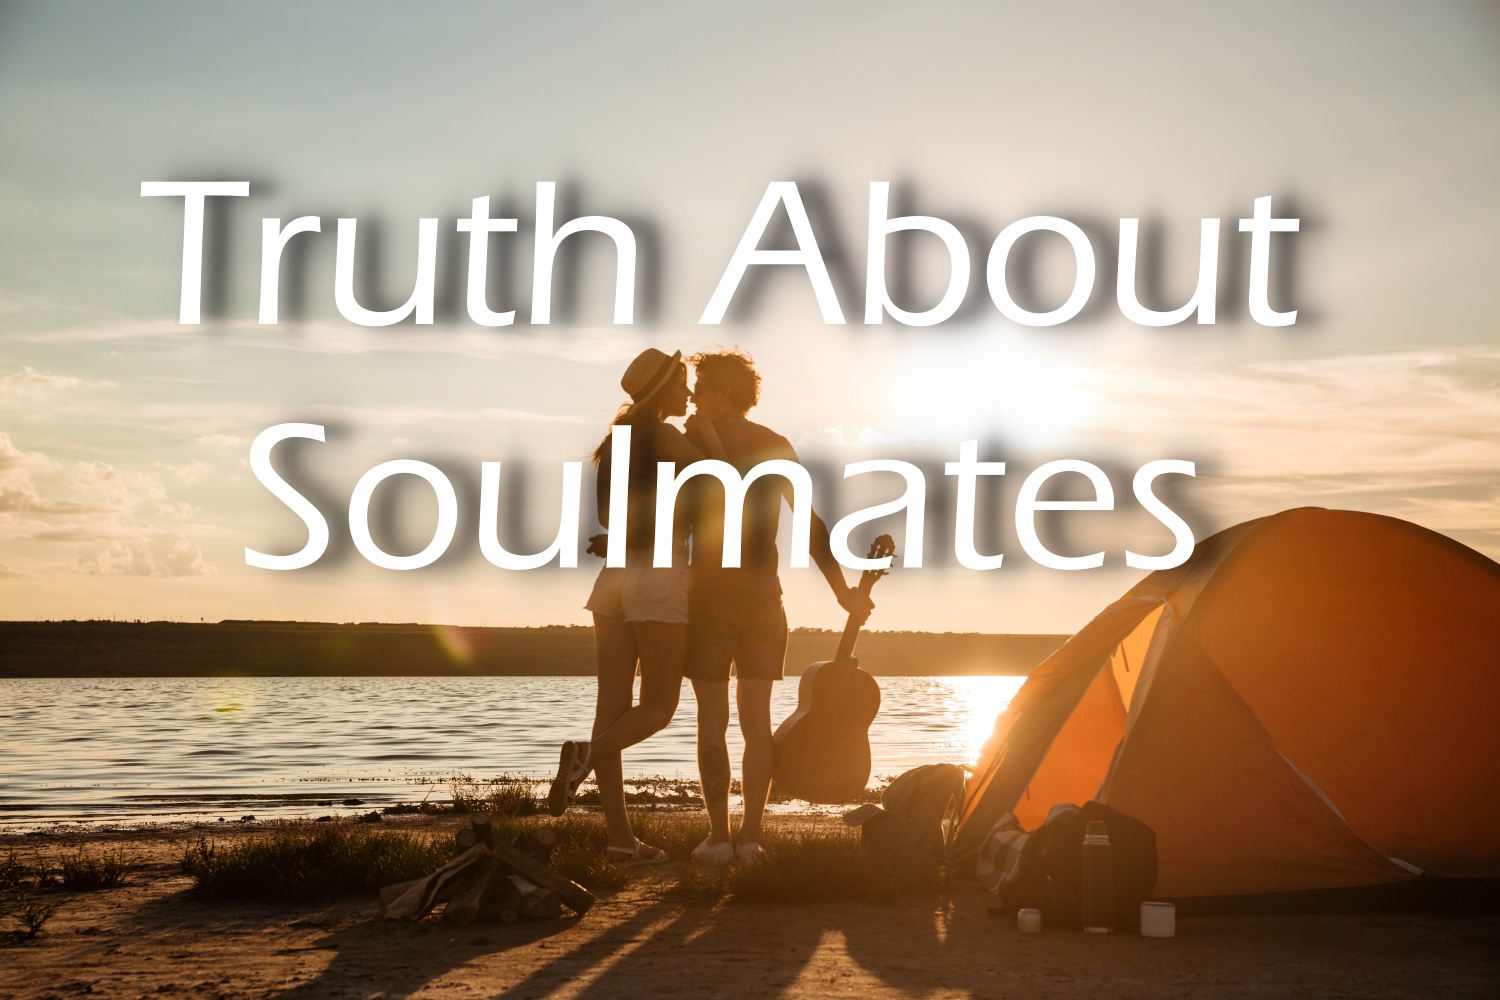 divine truth about soulmates